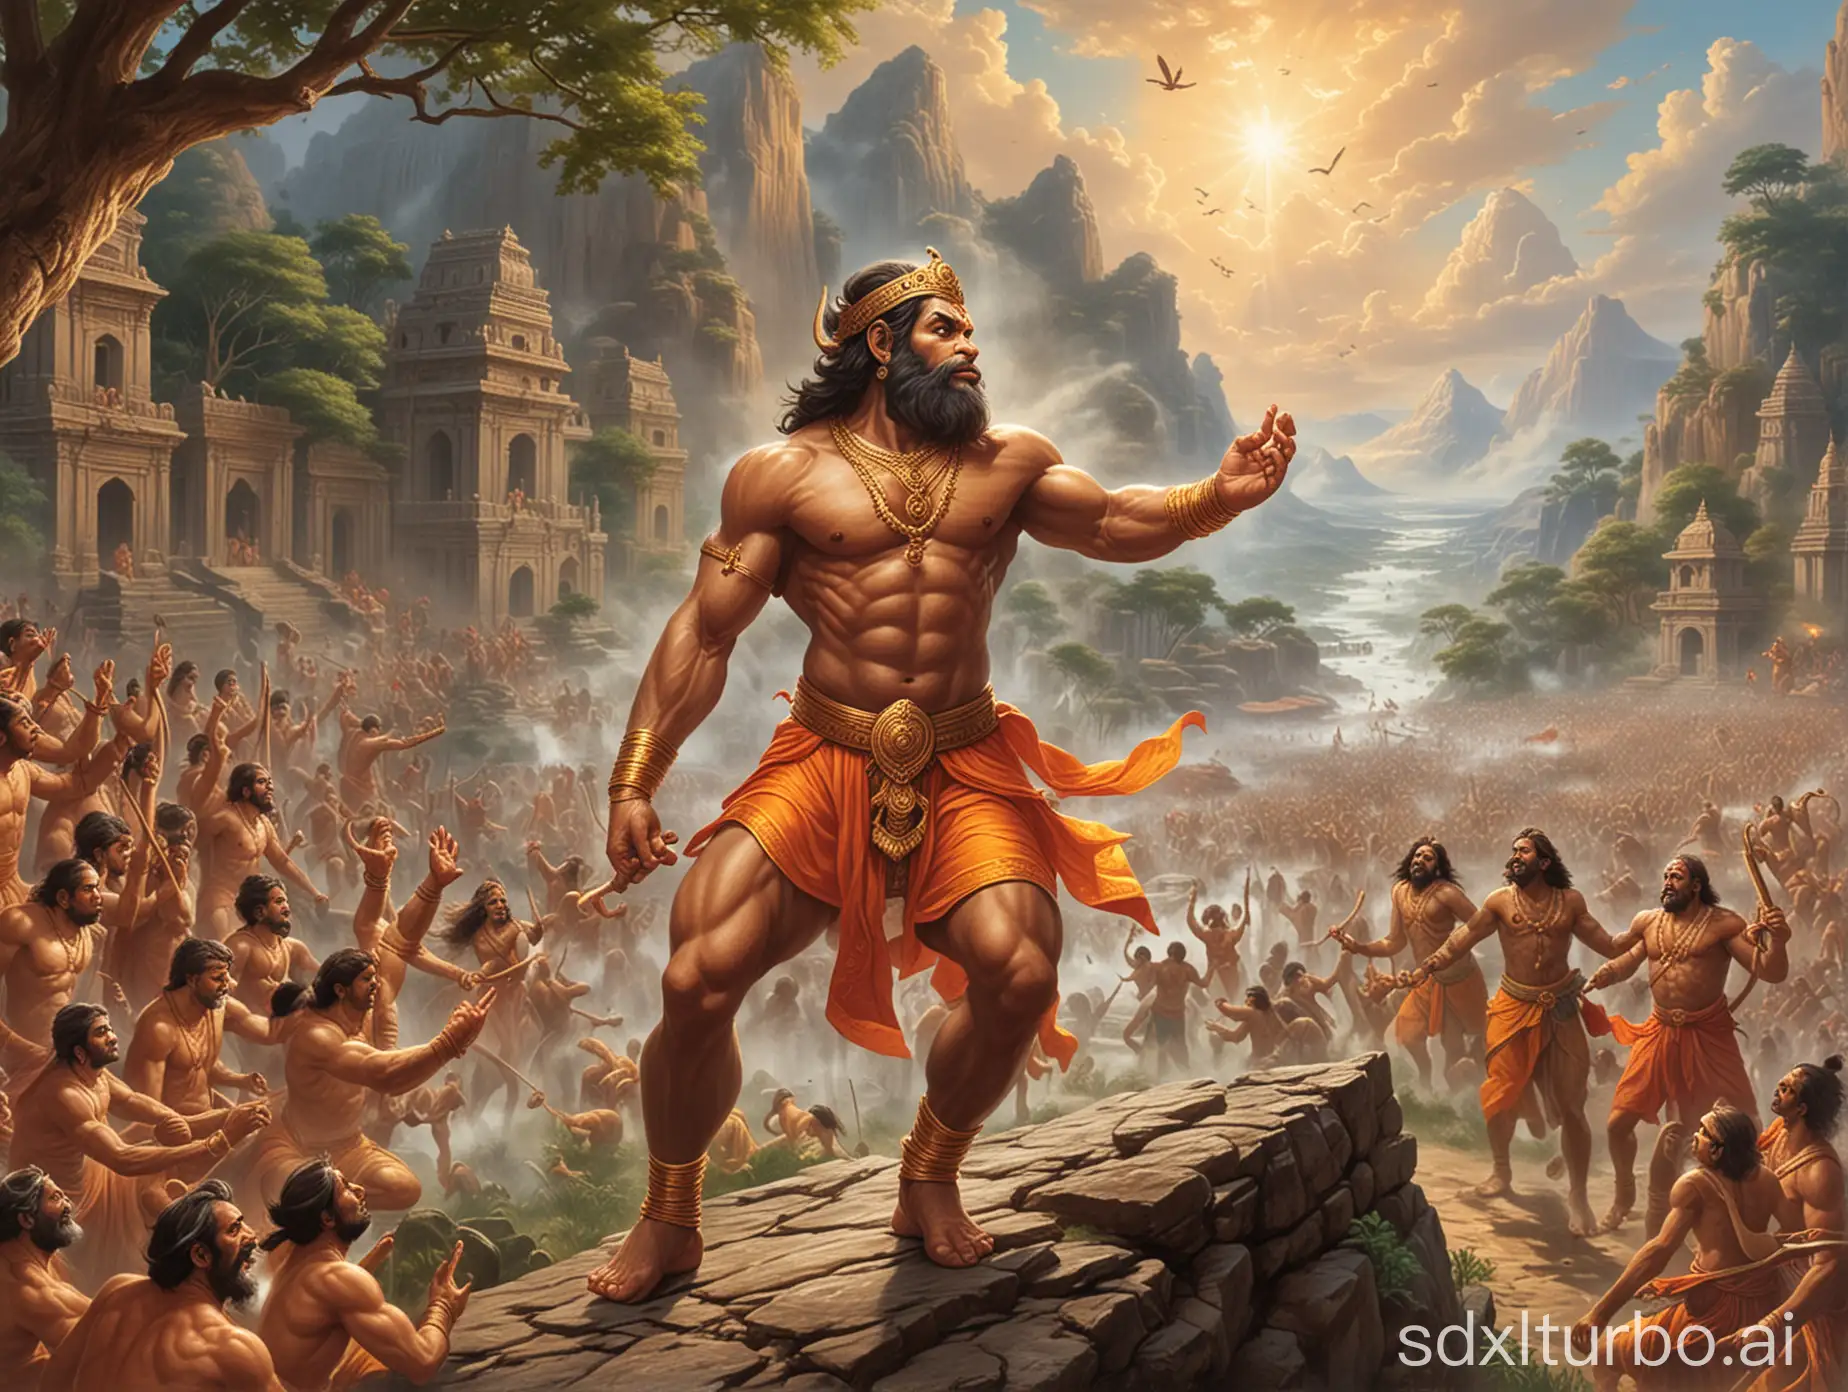 Divine Encounter Hanuman and Sri Ram in the Ancient Kingdom Generated by